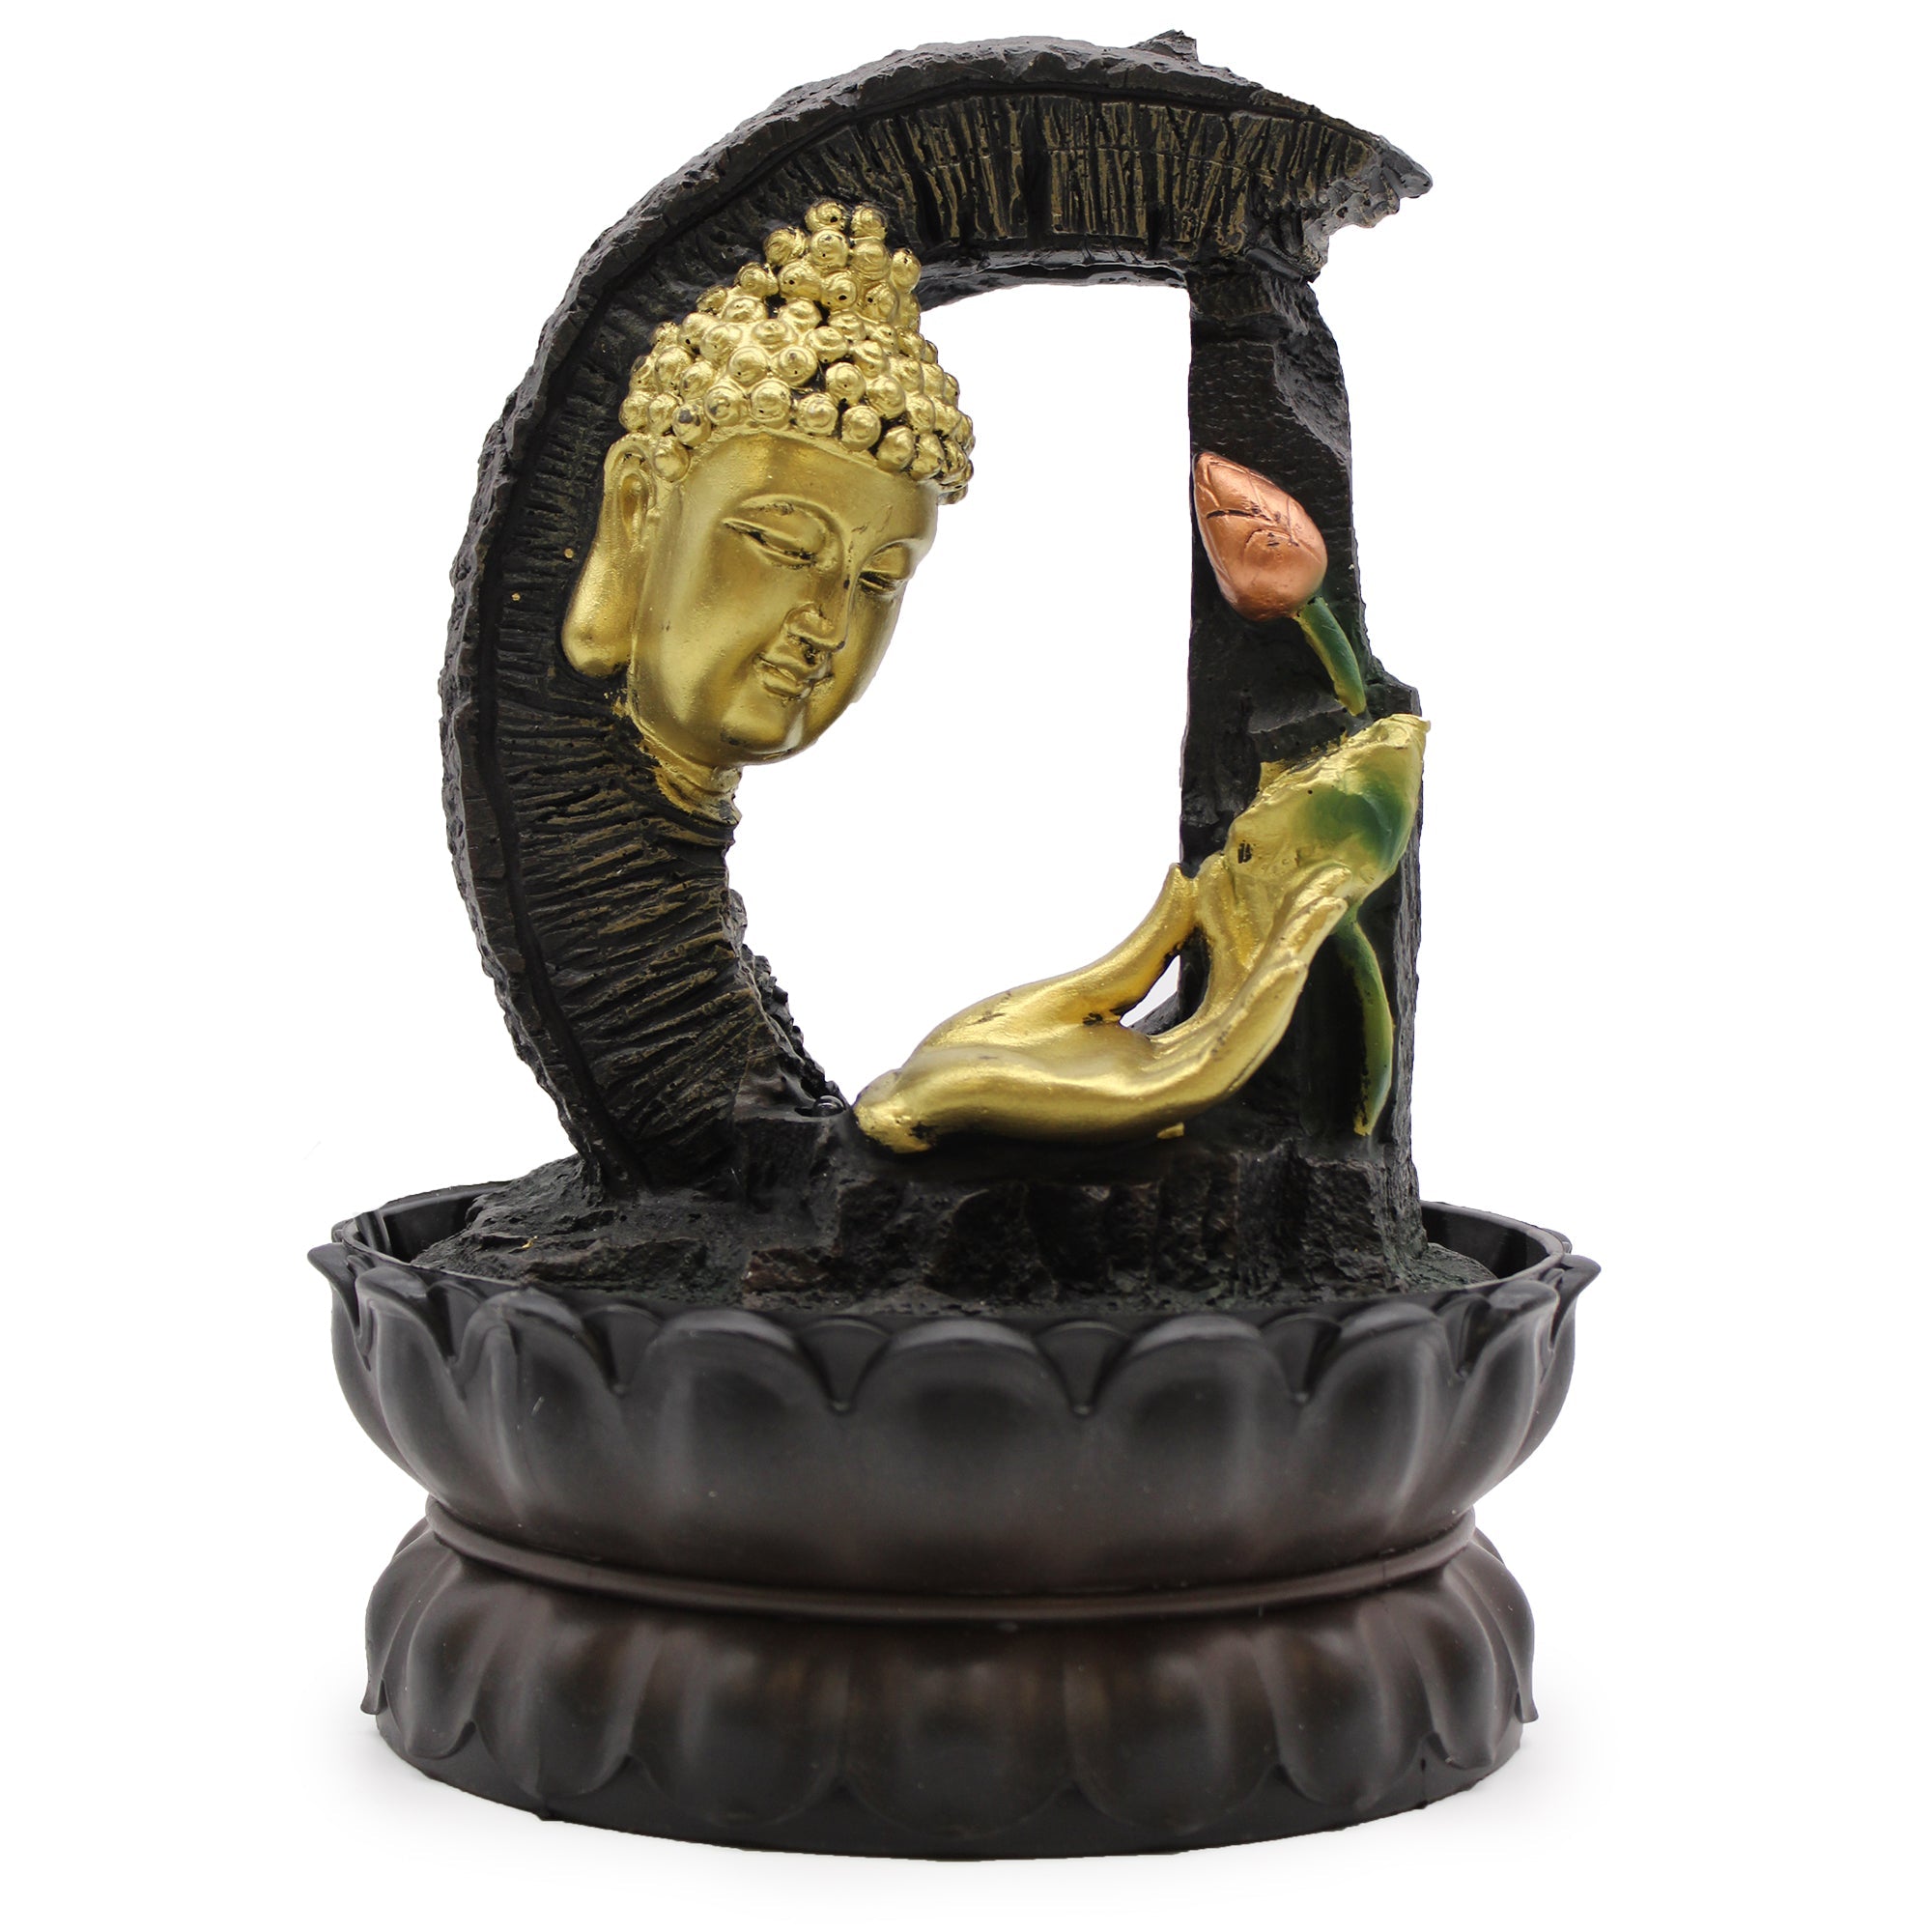 View Tabletop Water Feature 30cm Golden Buddha Lotus information